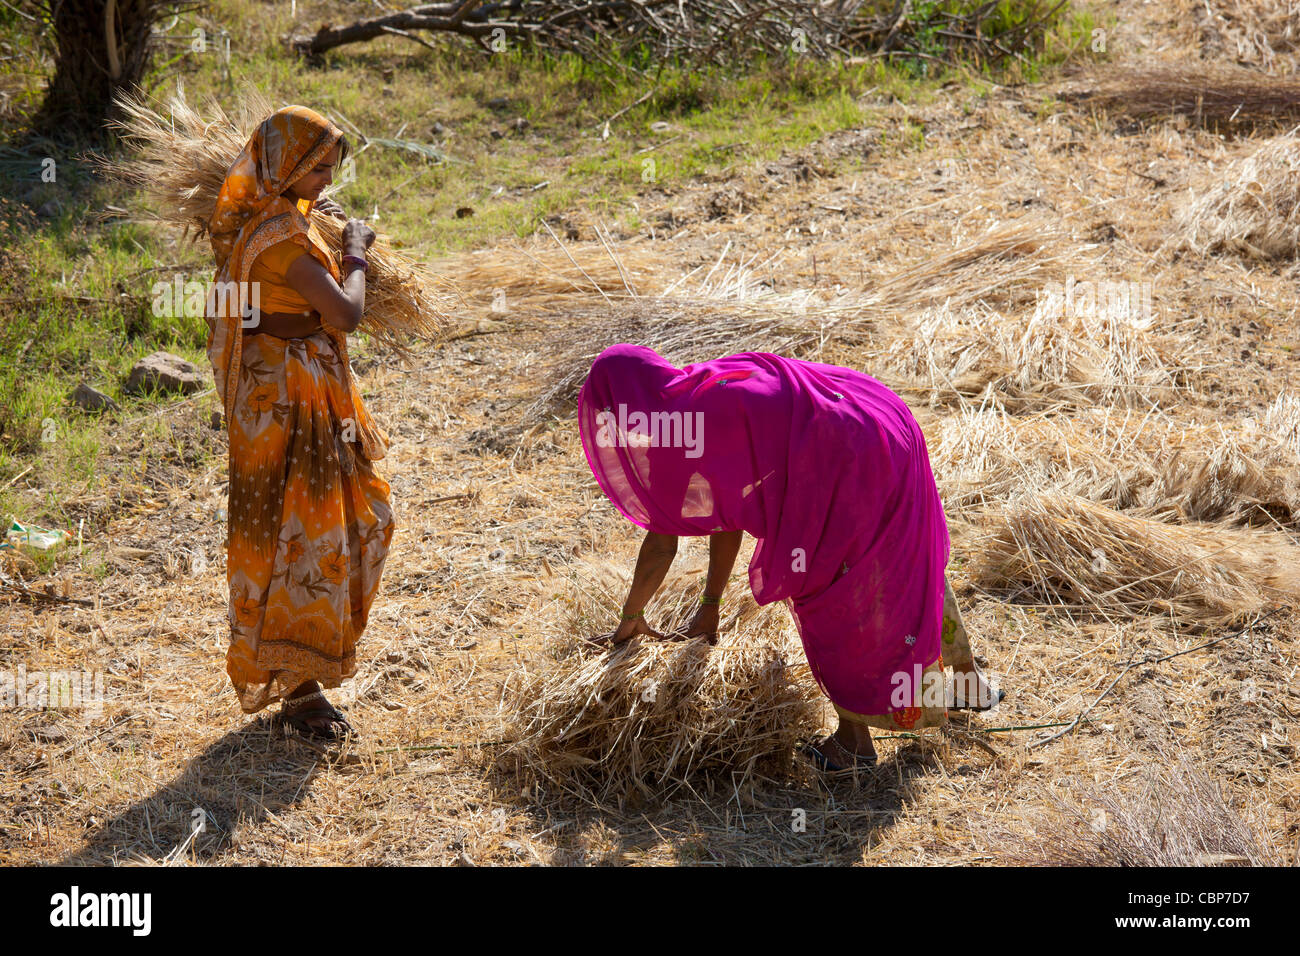 Women agricultural workers at Jaswant Garh in Rajasthan, Western India Stock Photo